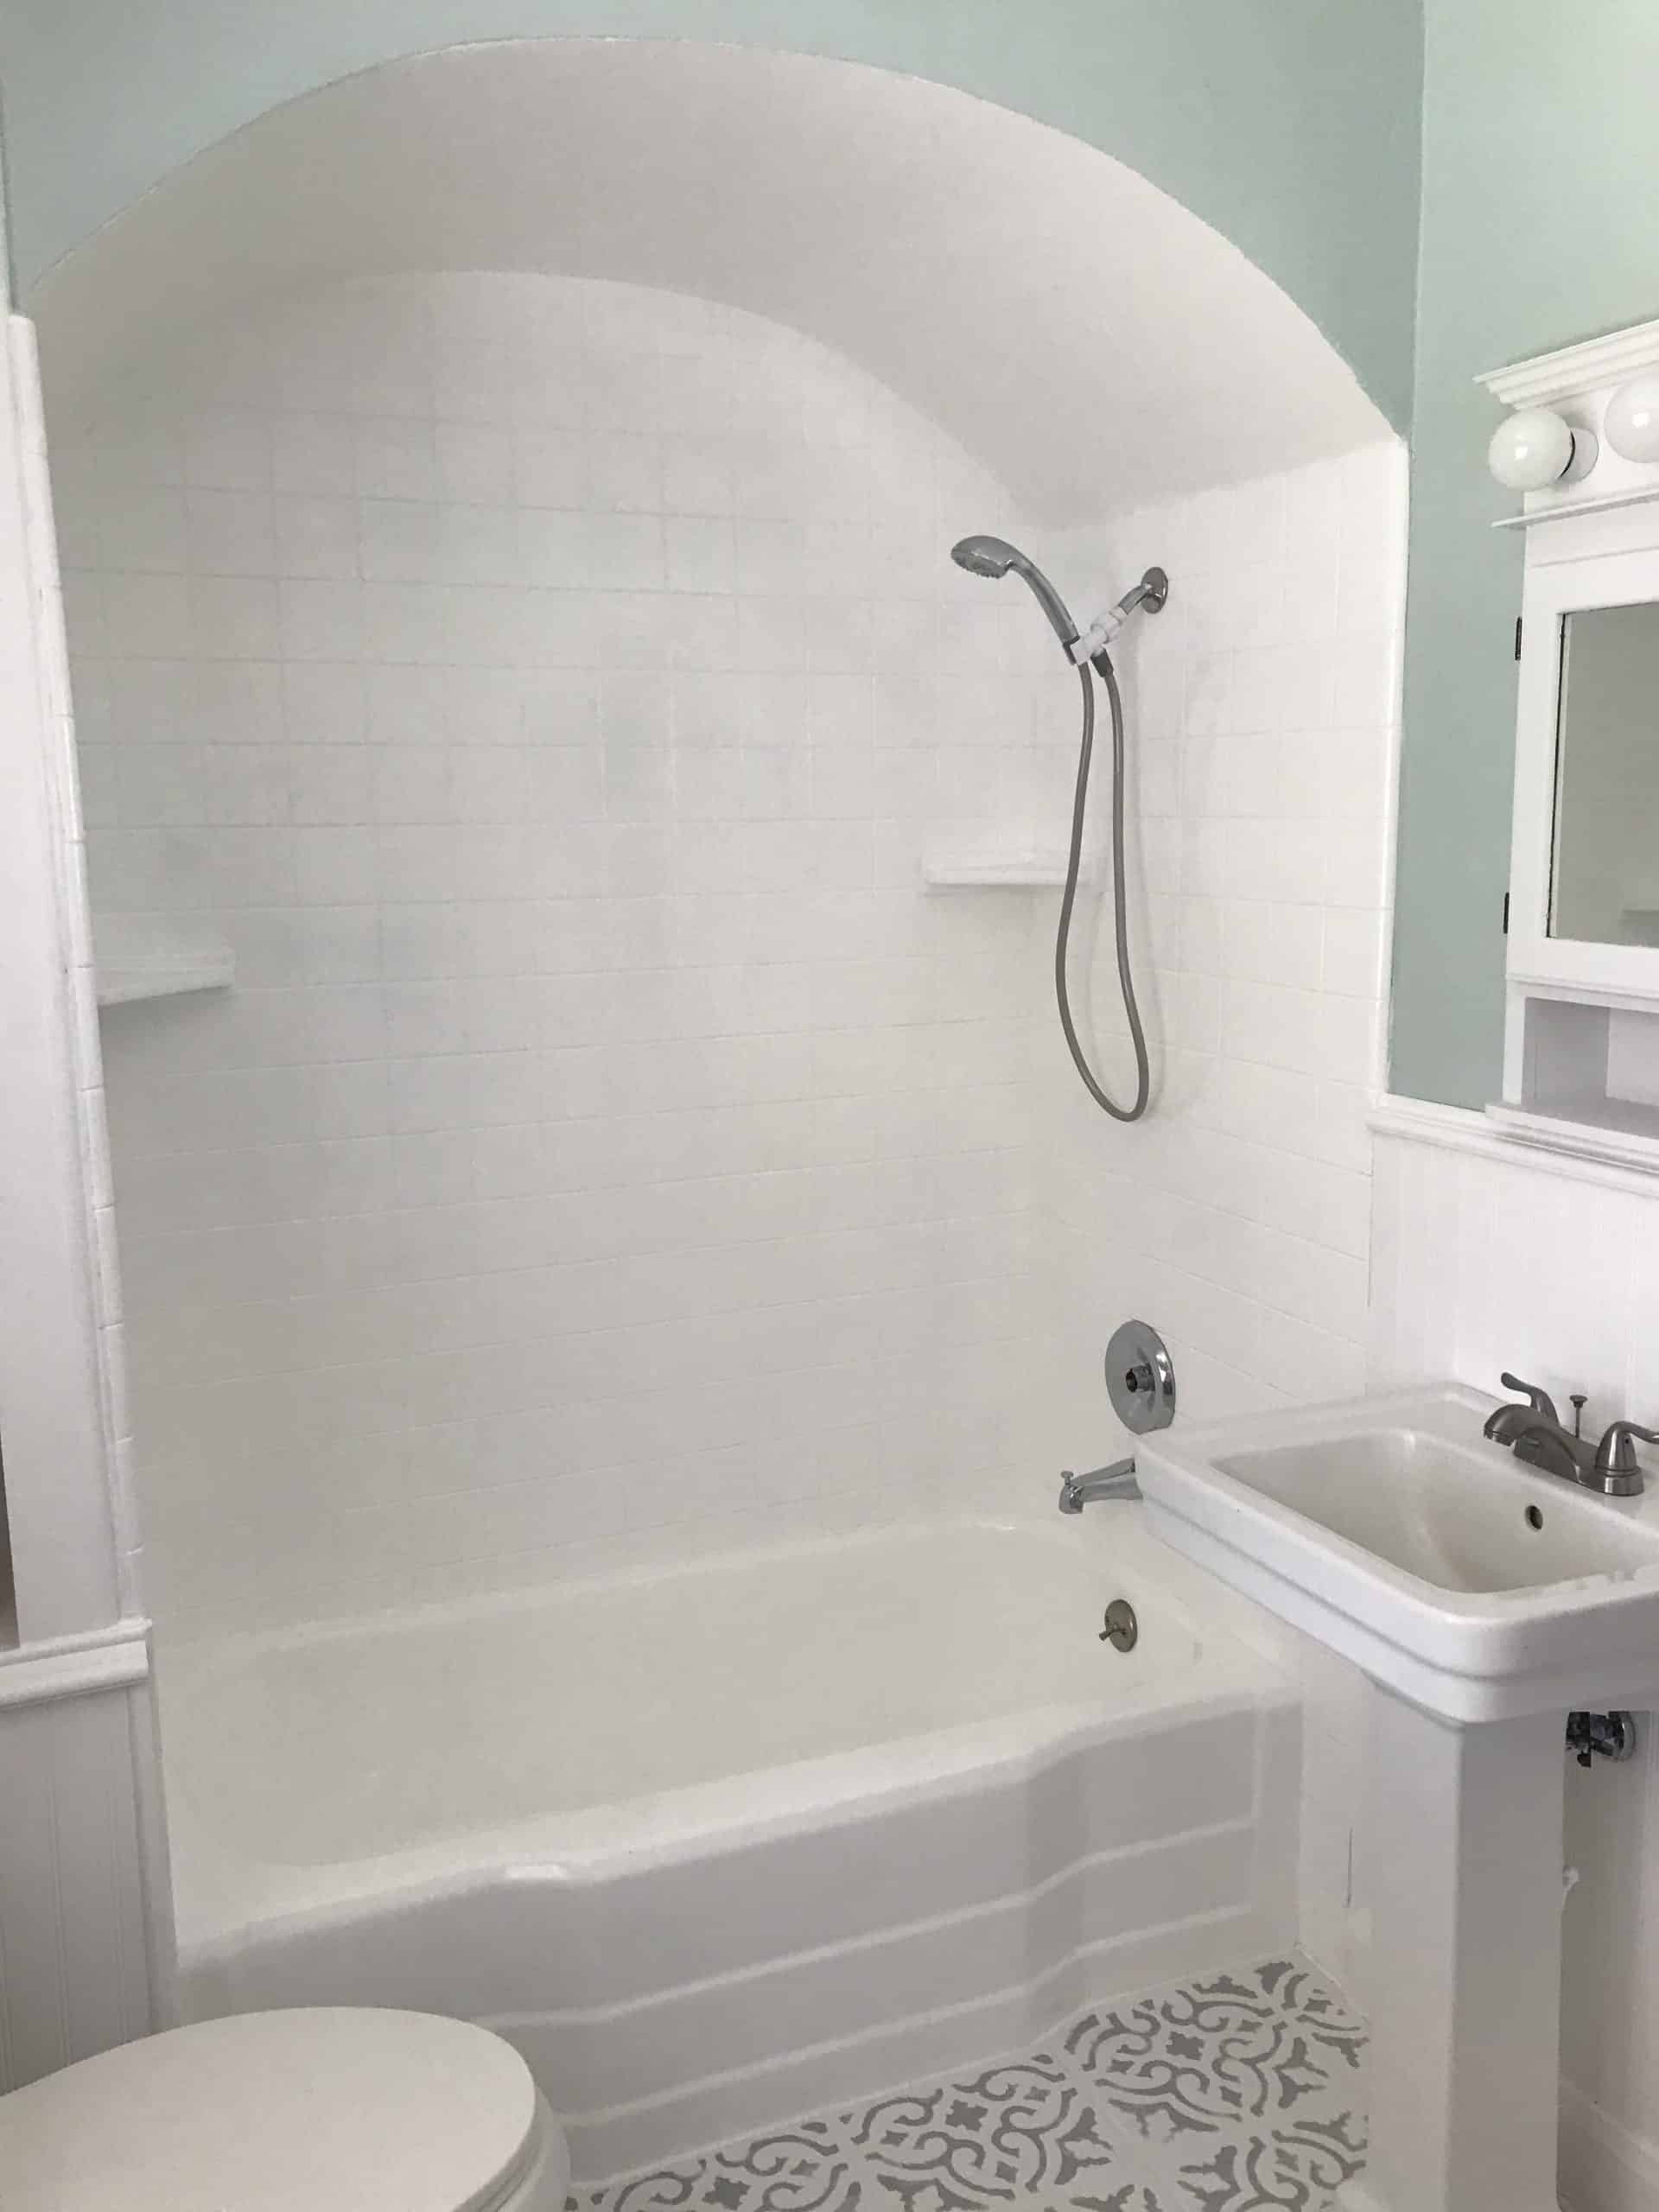 Painted white tile in shower